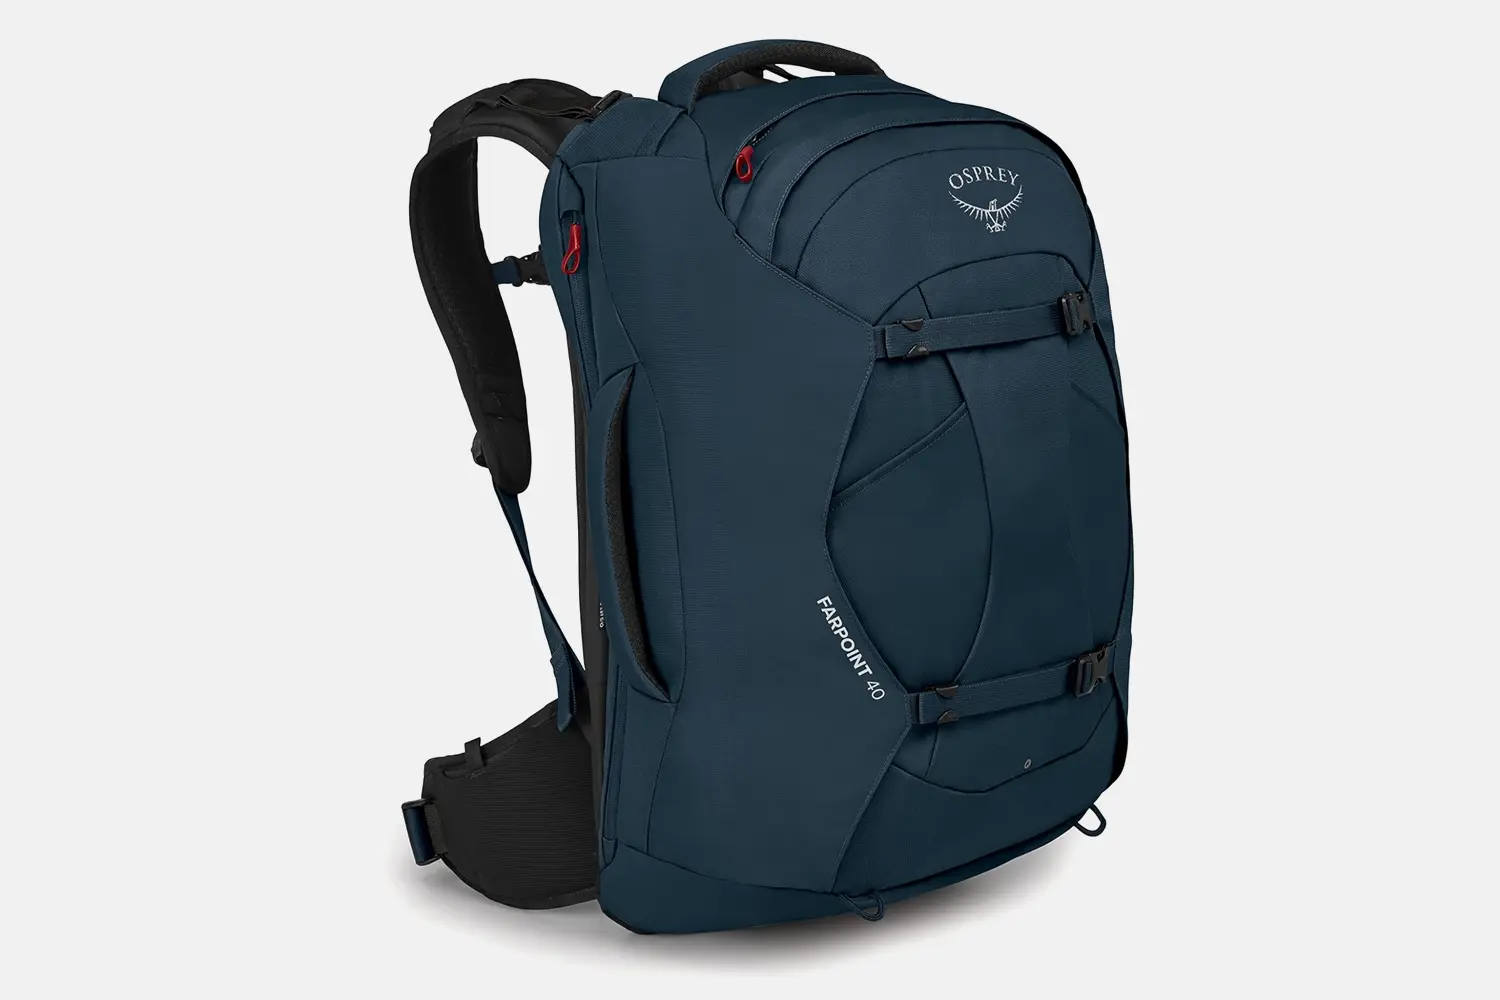 Osprey Farpoint 40 Carry-on Backpack